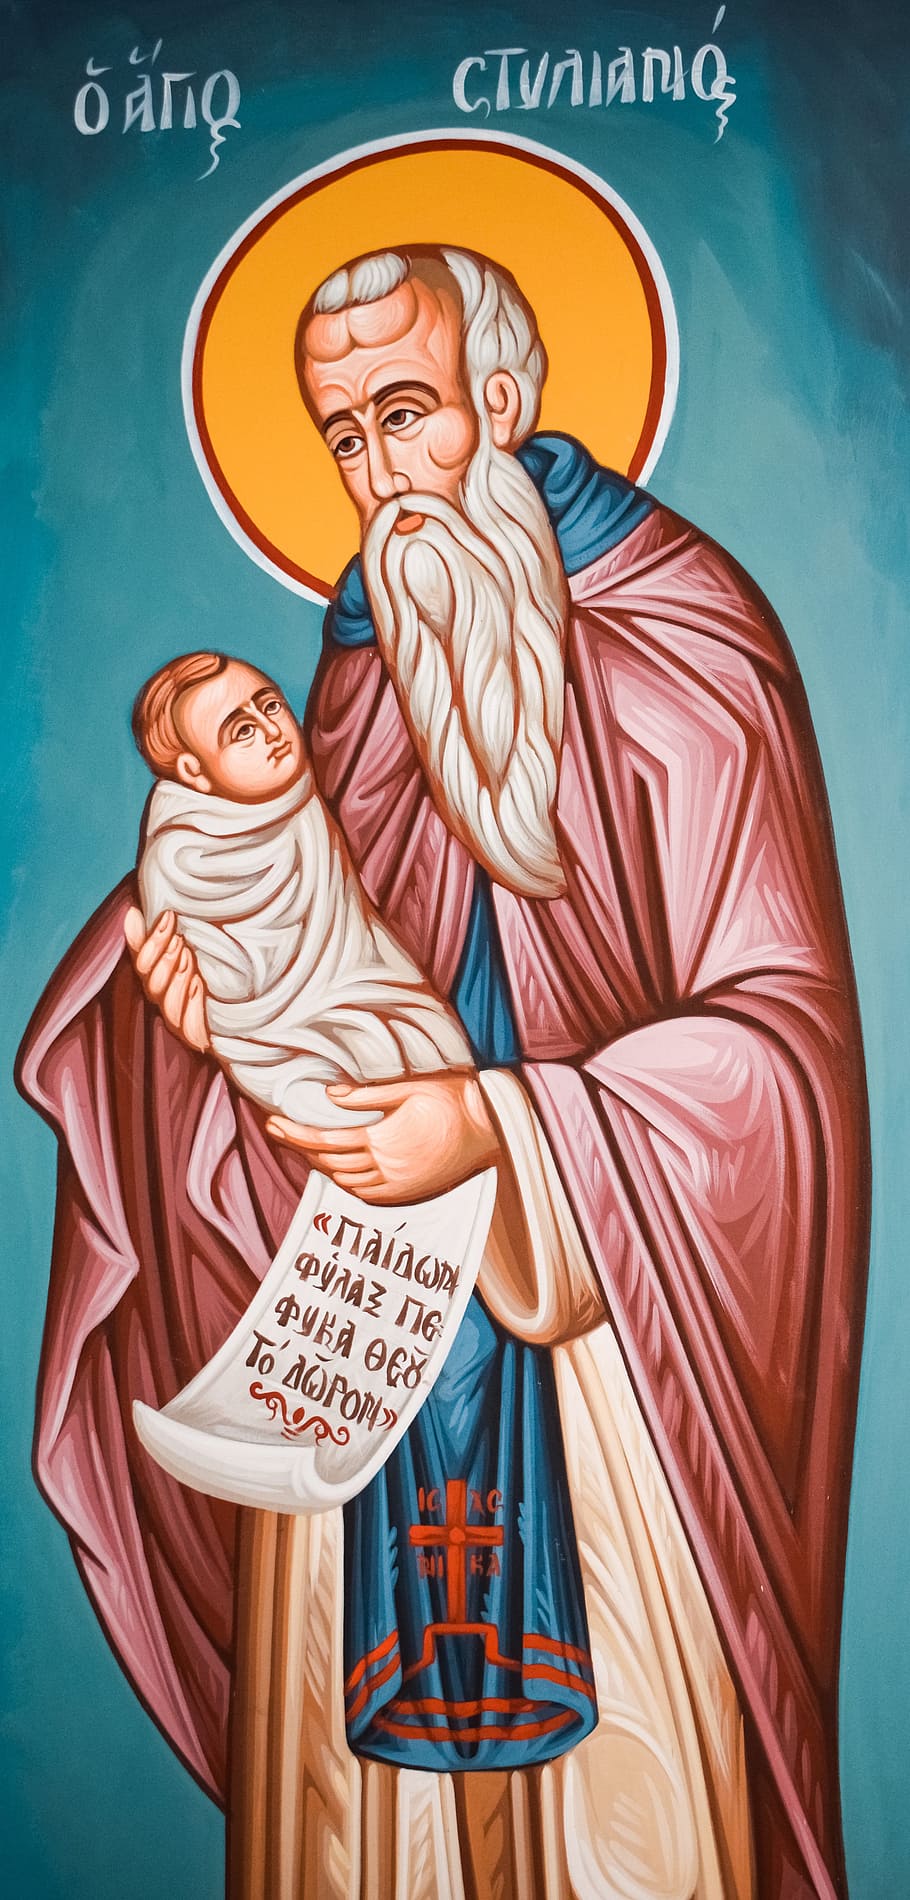 Stylianos, Baby, Protector, ayios stylianos, saint, baby protector, iconography, painting, church, religion